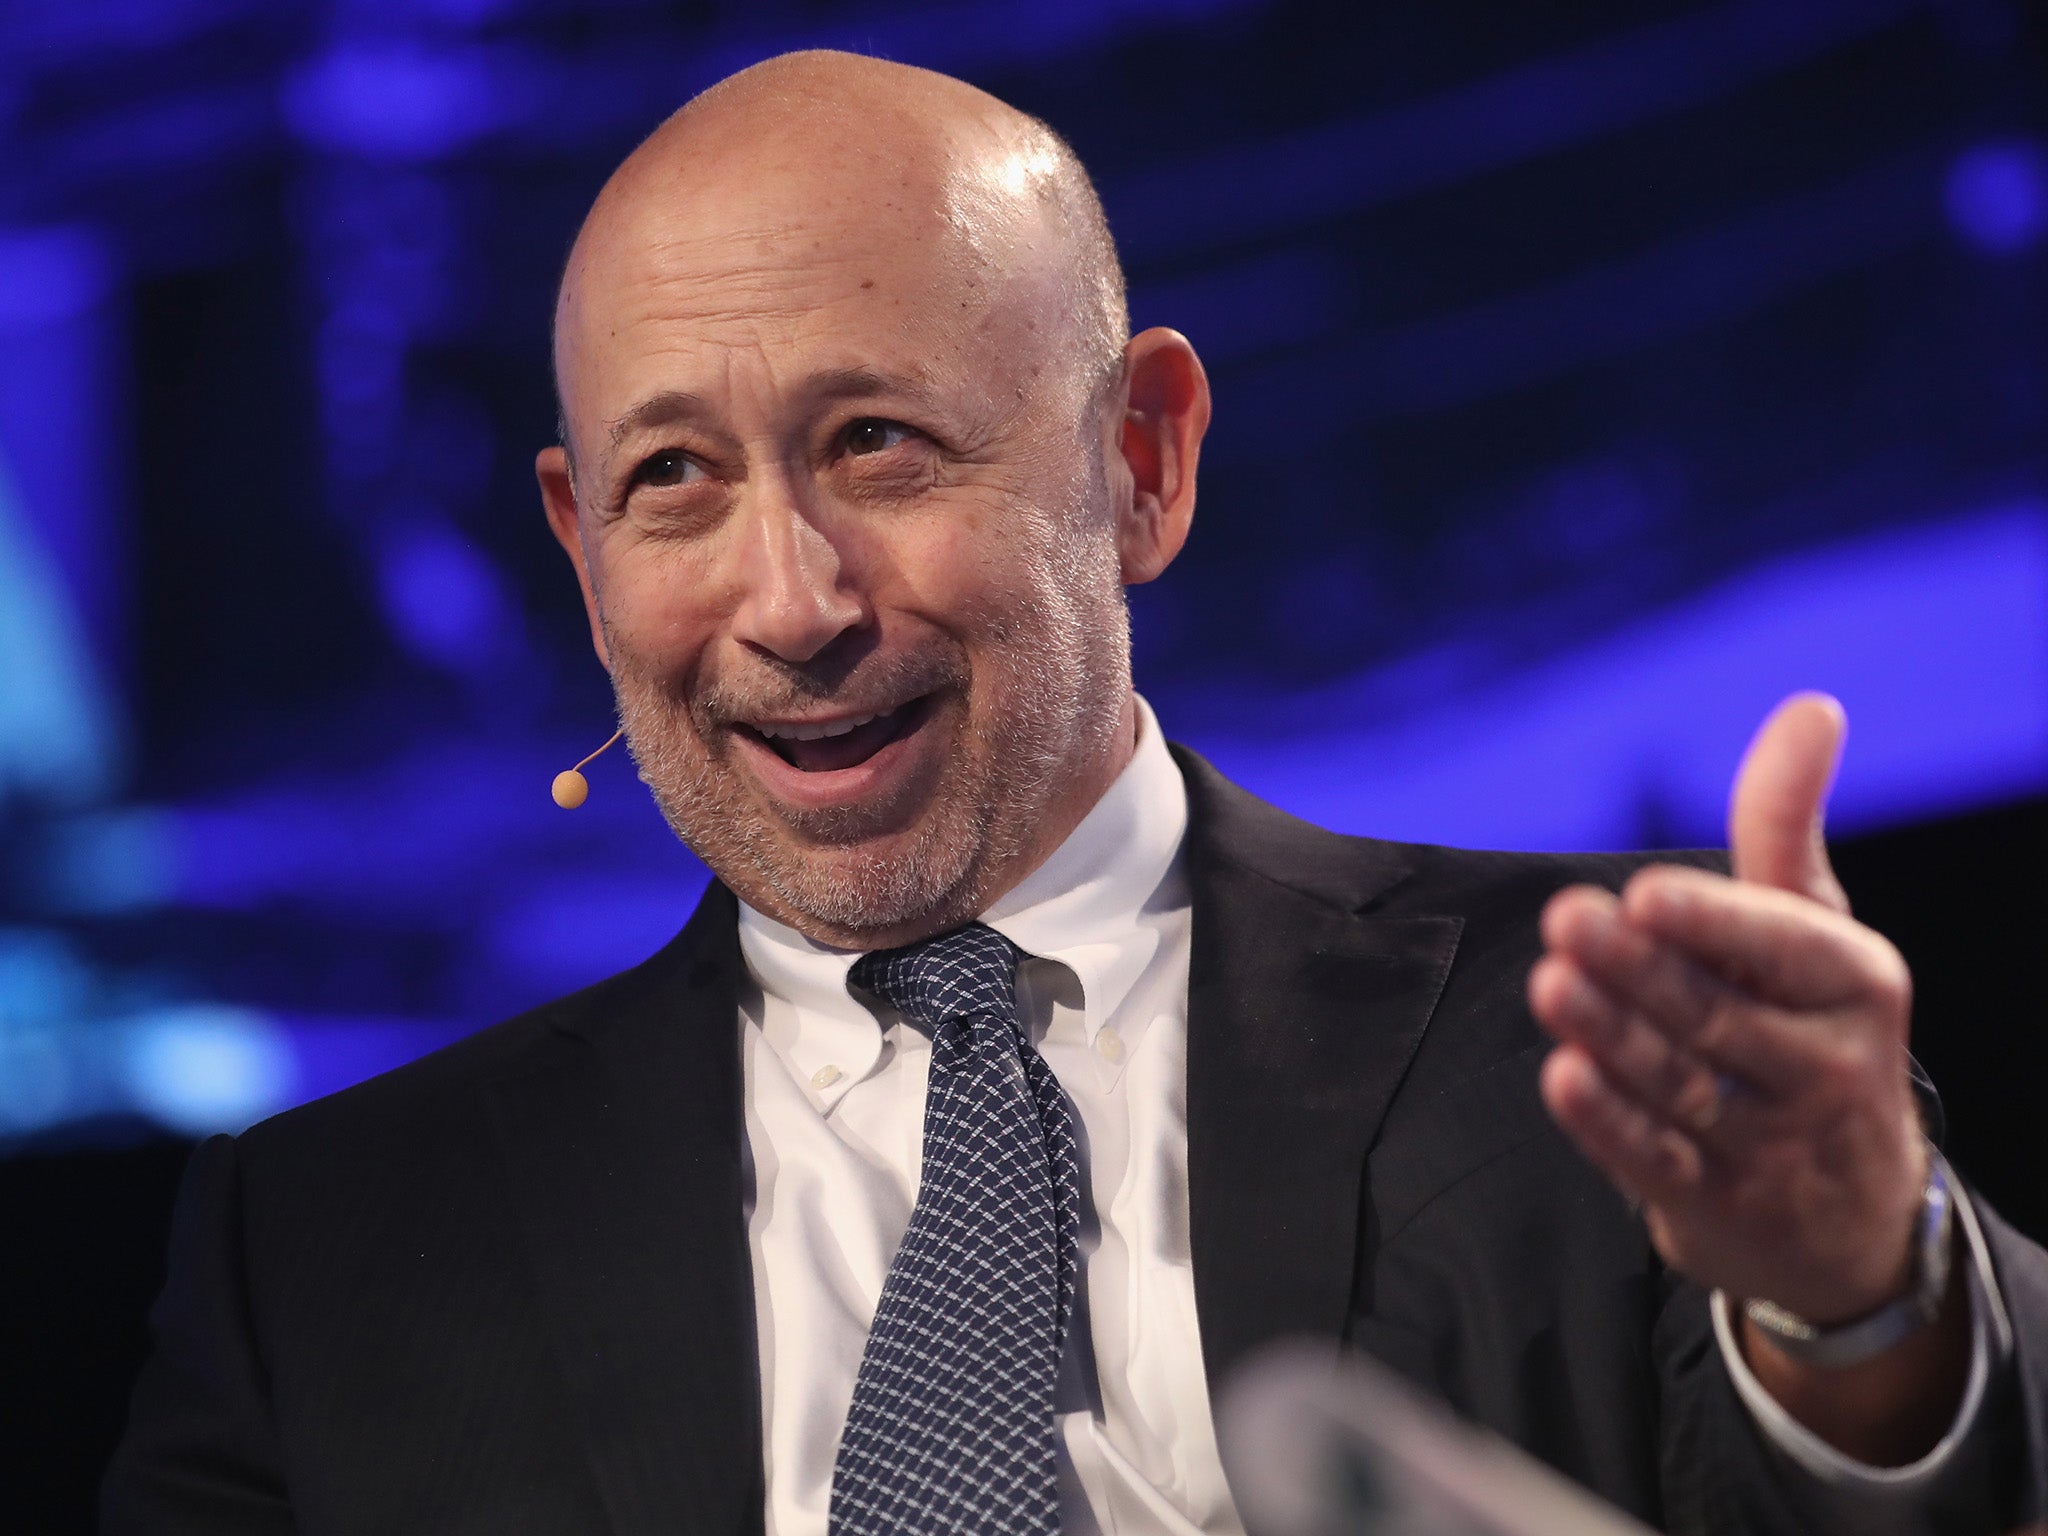 Mr Blankfein was born in the Bronx, where his father was a bakery truck driver turned post office mail sorter and his mother a receptionist